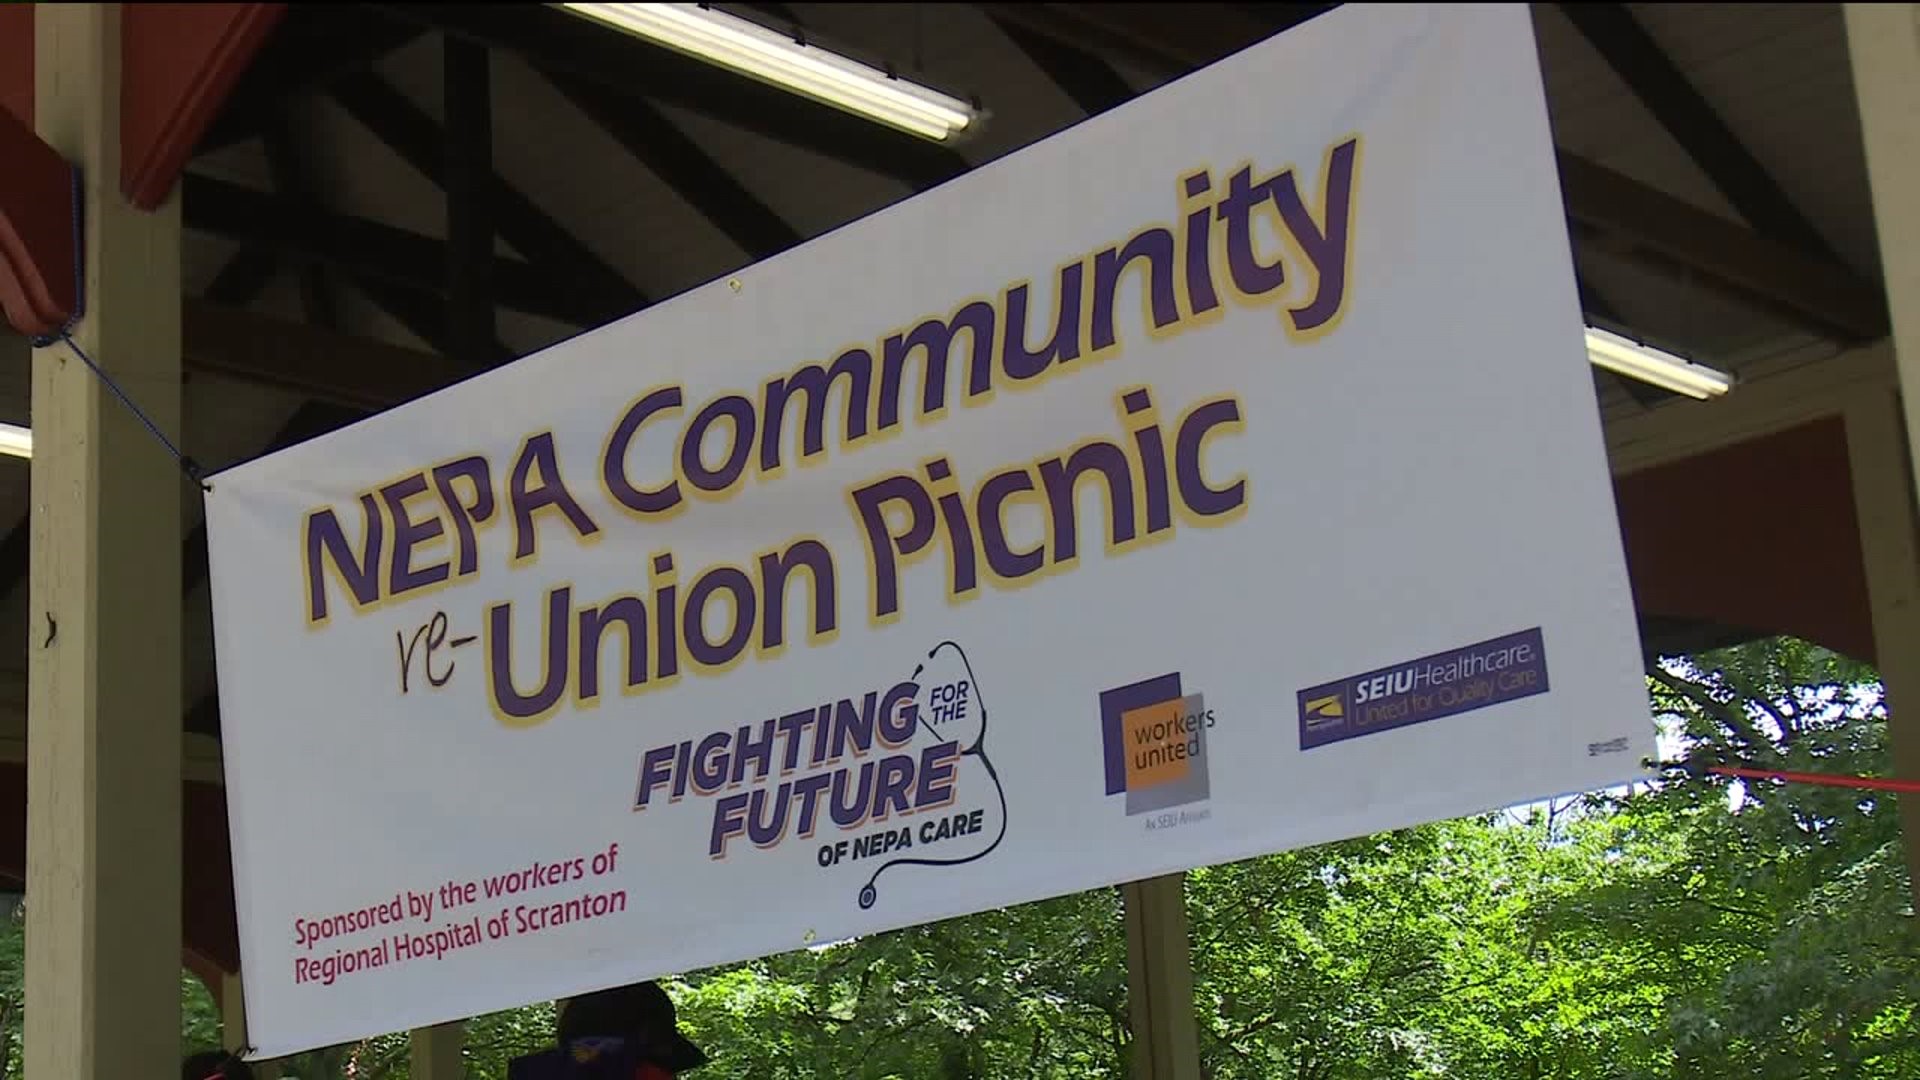 Unions Hold Picnic for Families to Discuss Health Care